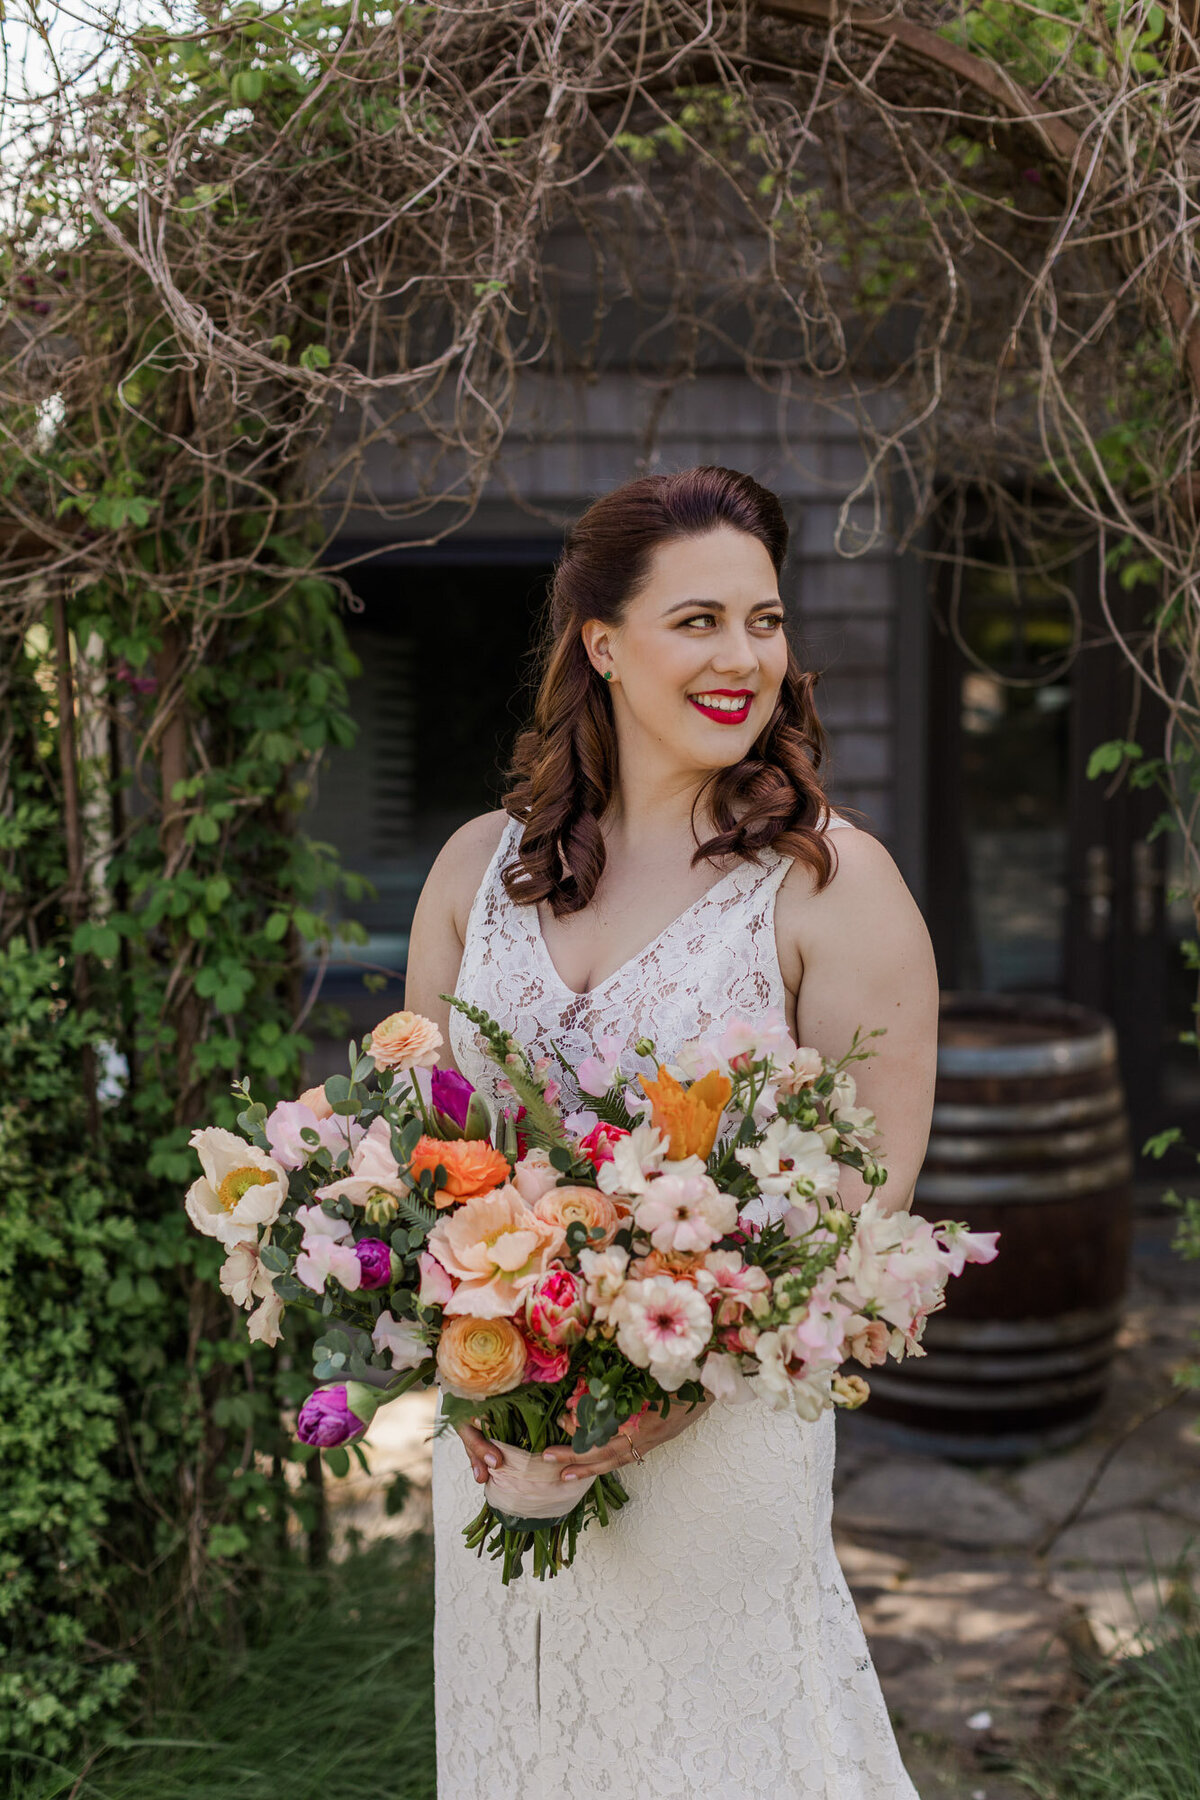 Bride-looks-down-at-her-colorful-bouquet-of-flowers-at-her-wedding-at-venue-Hidden-Meadows-in-Snohomish-WA-photo-by-Joanna-Monger-Photography